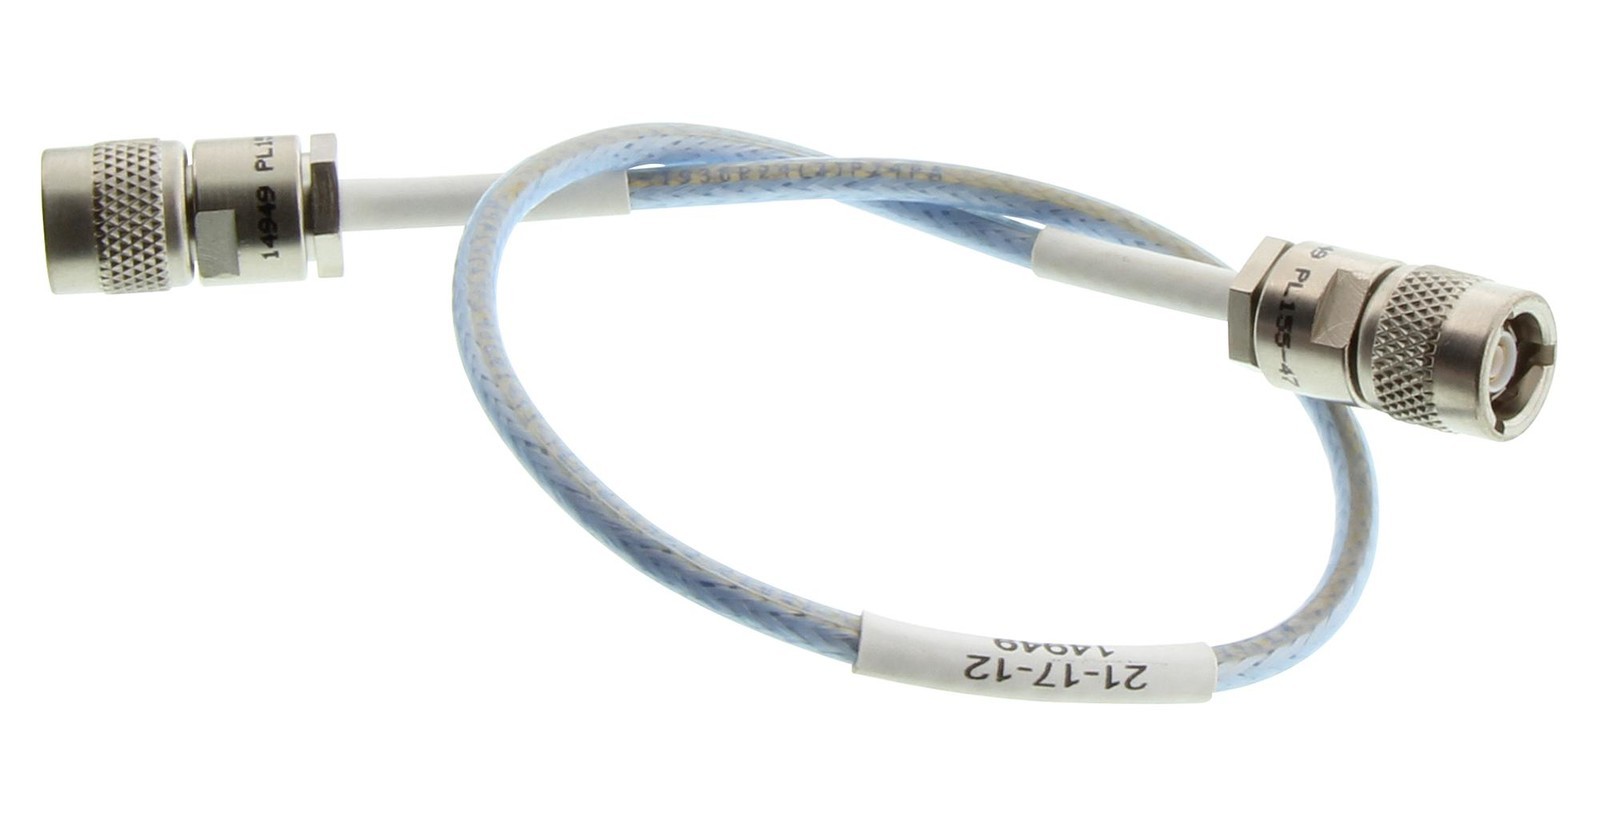 Trompeter Cinch Connectivity 21-17-12 Trs / Trs, M17/176 Cable, 12 Inches 26Ah1134